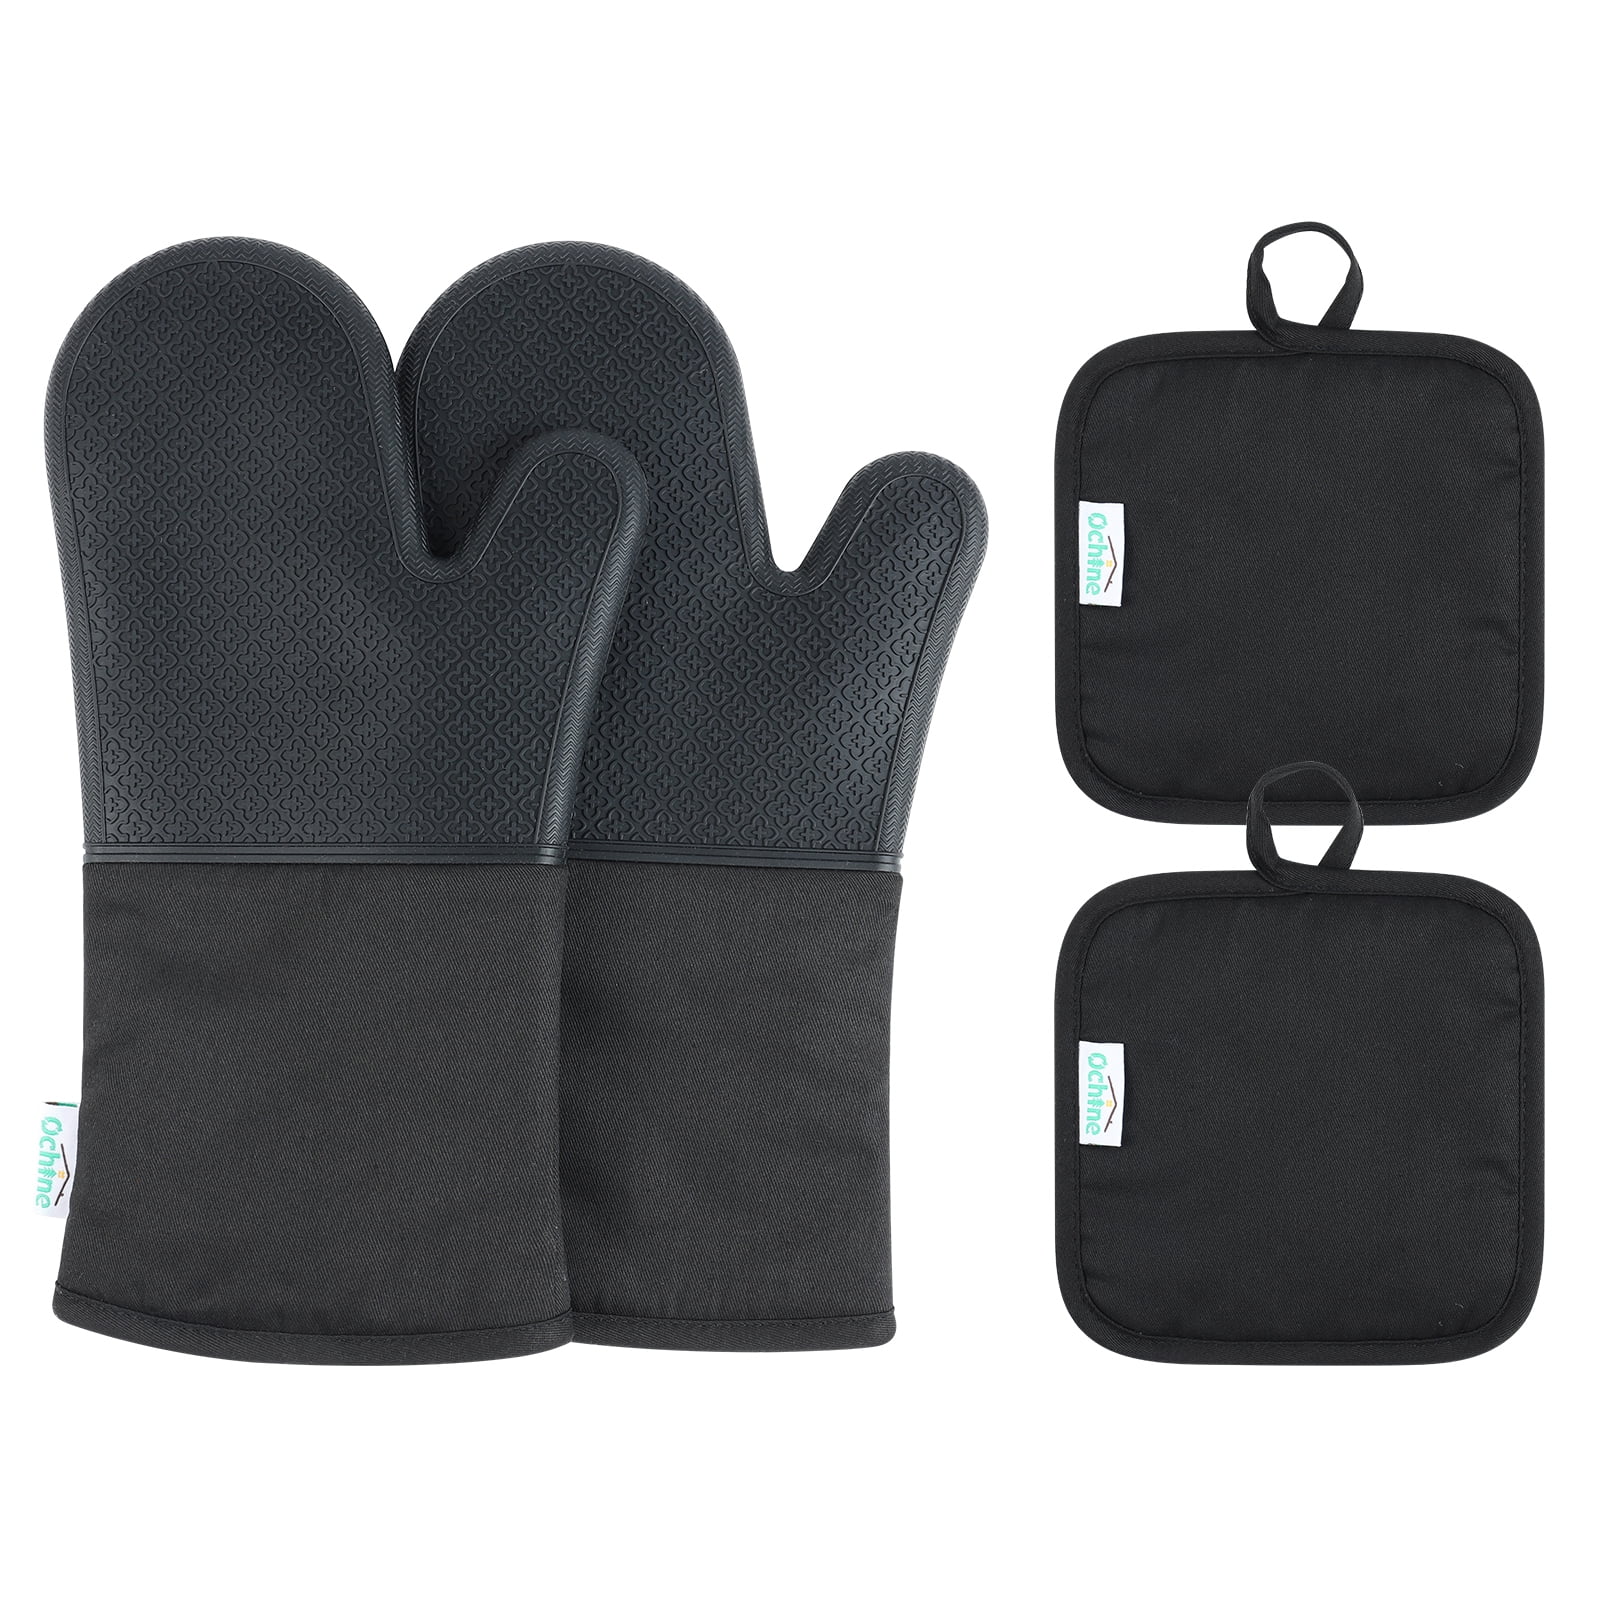  HOMWE Silicone Oven Mitts and Pot Holders, 4-Piece Set, Heavy  Duty Cooking Gloves, Kitchen Counter Safe Trivet Mats, Advanced Heat  Resistance, Slip-Resistant Textured Grip, Black : Home & Kitchen